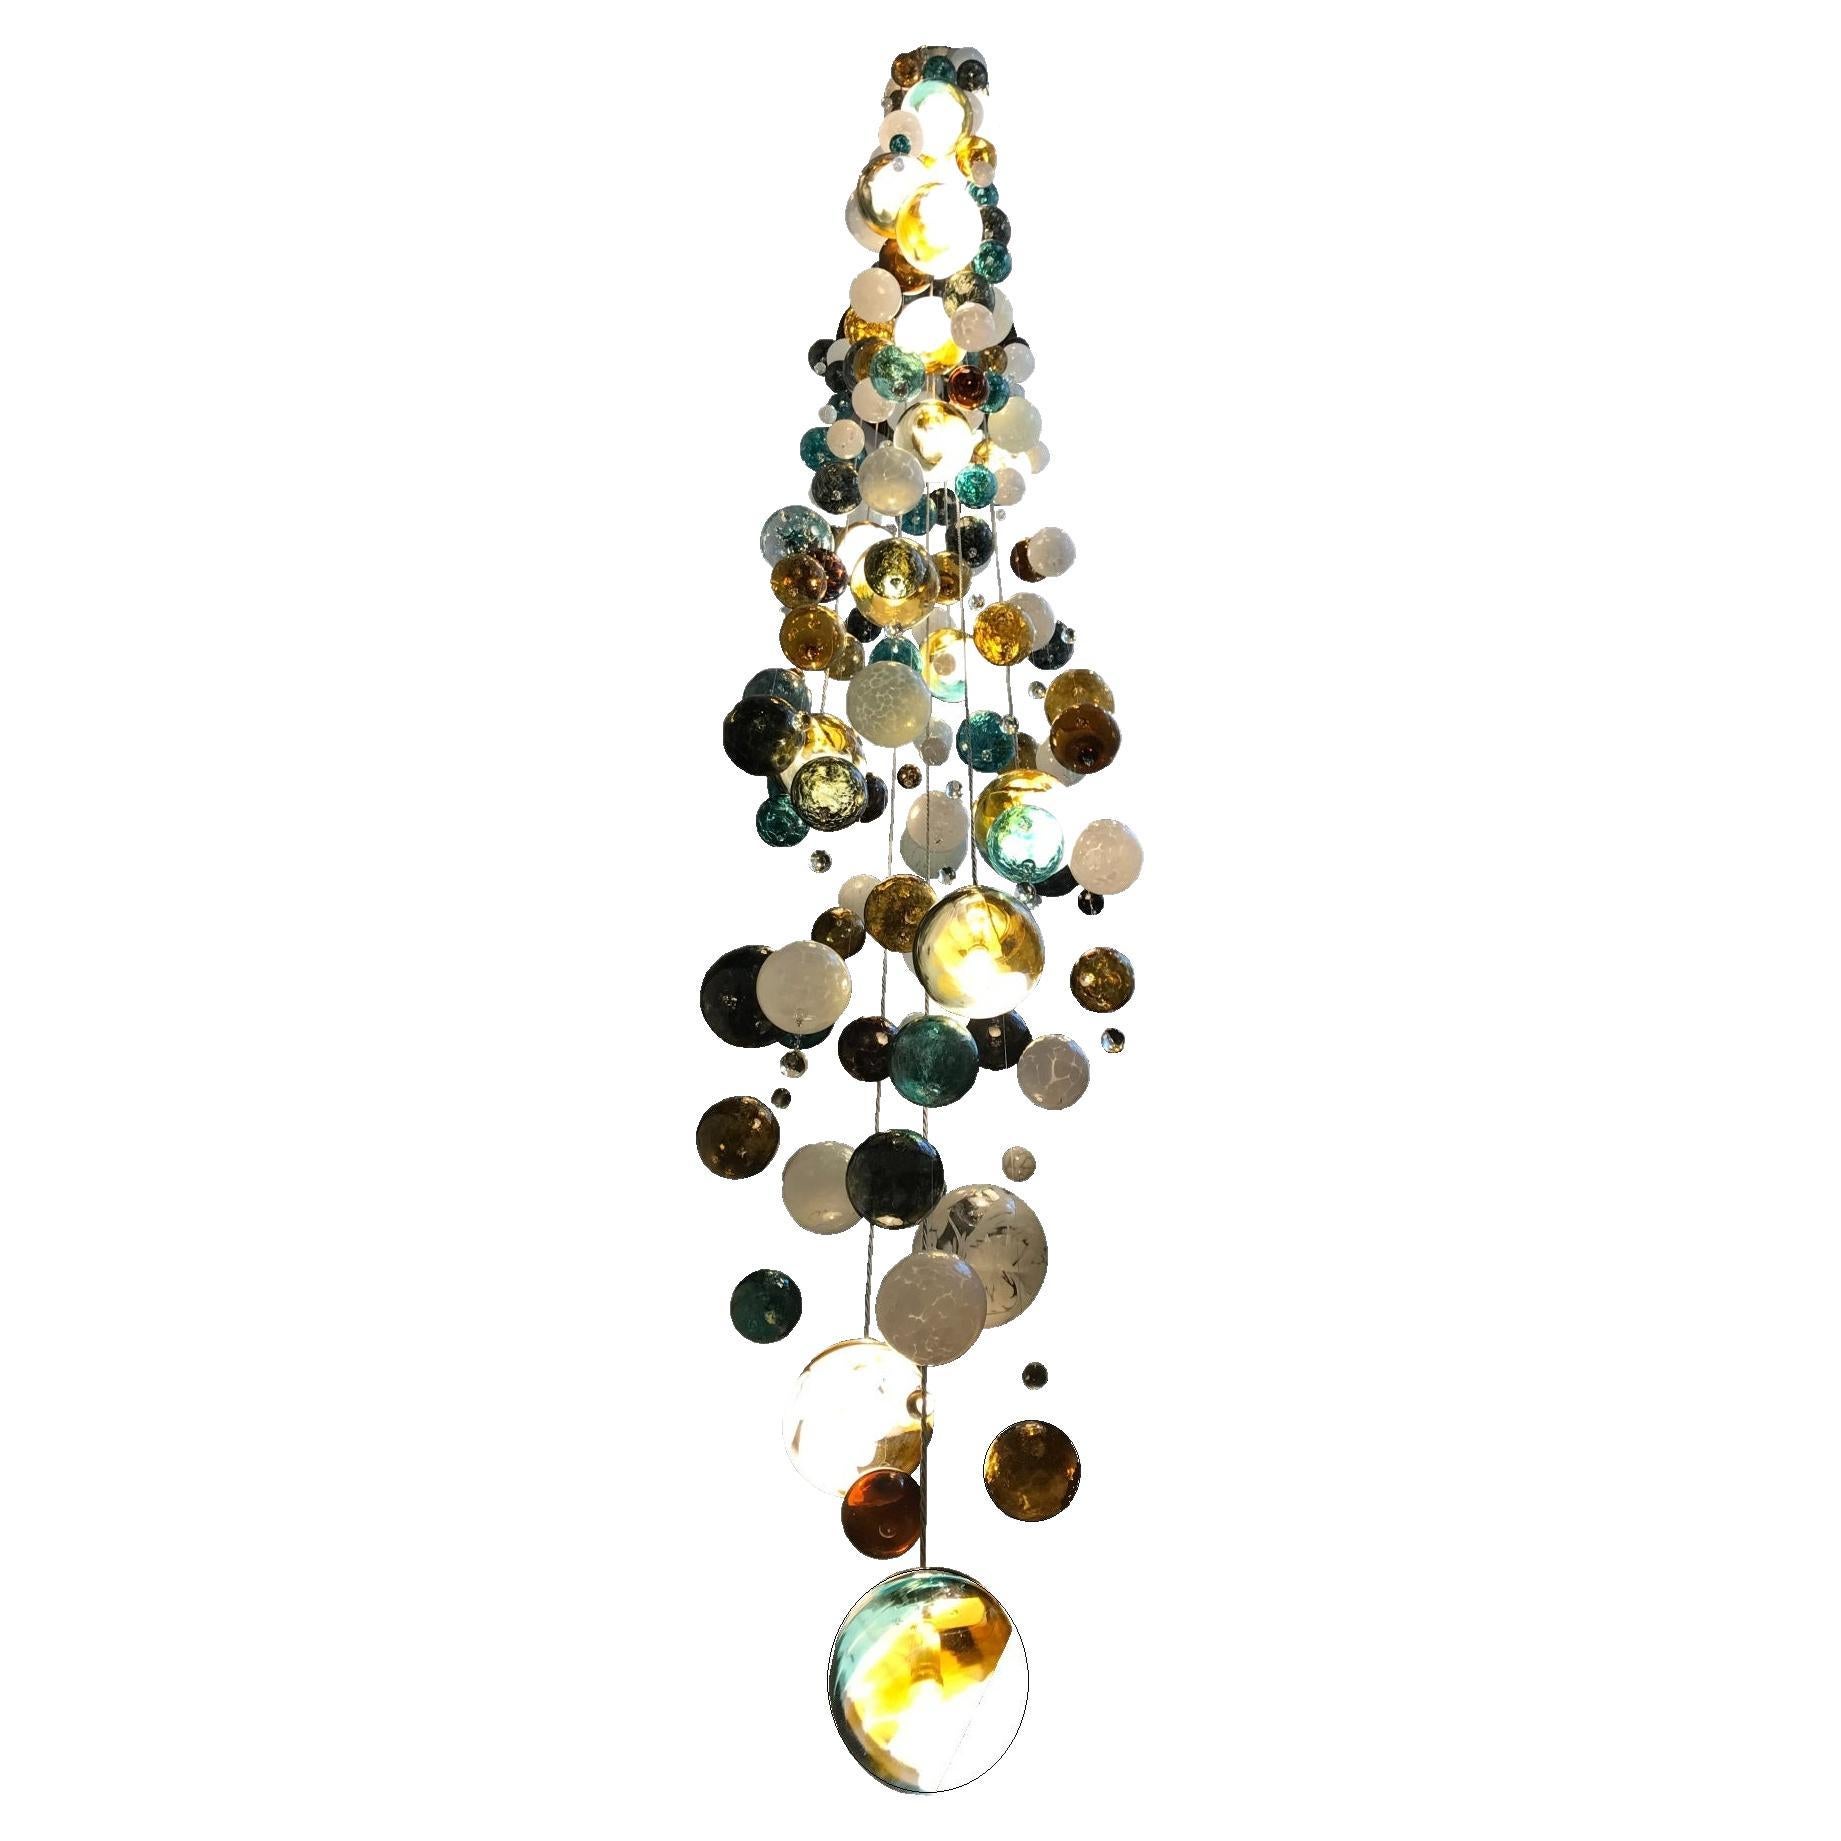 Statement Contemporary Stairwell Cascade Chandelier by Roast For Sale